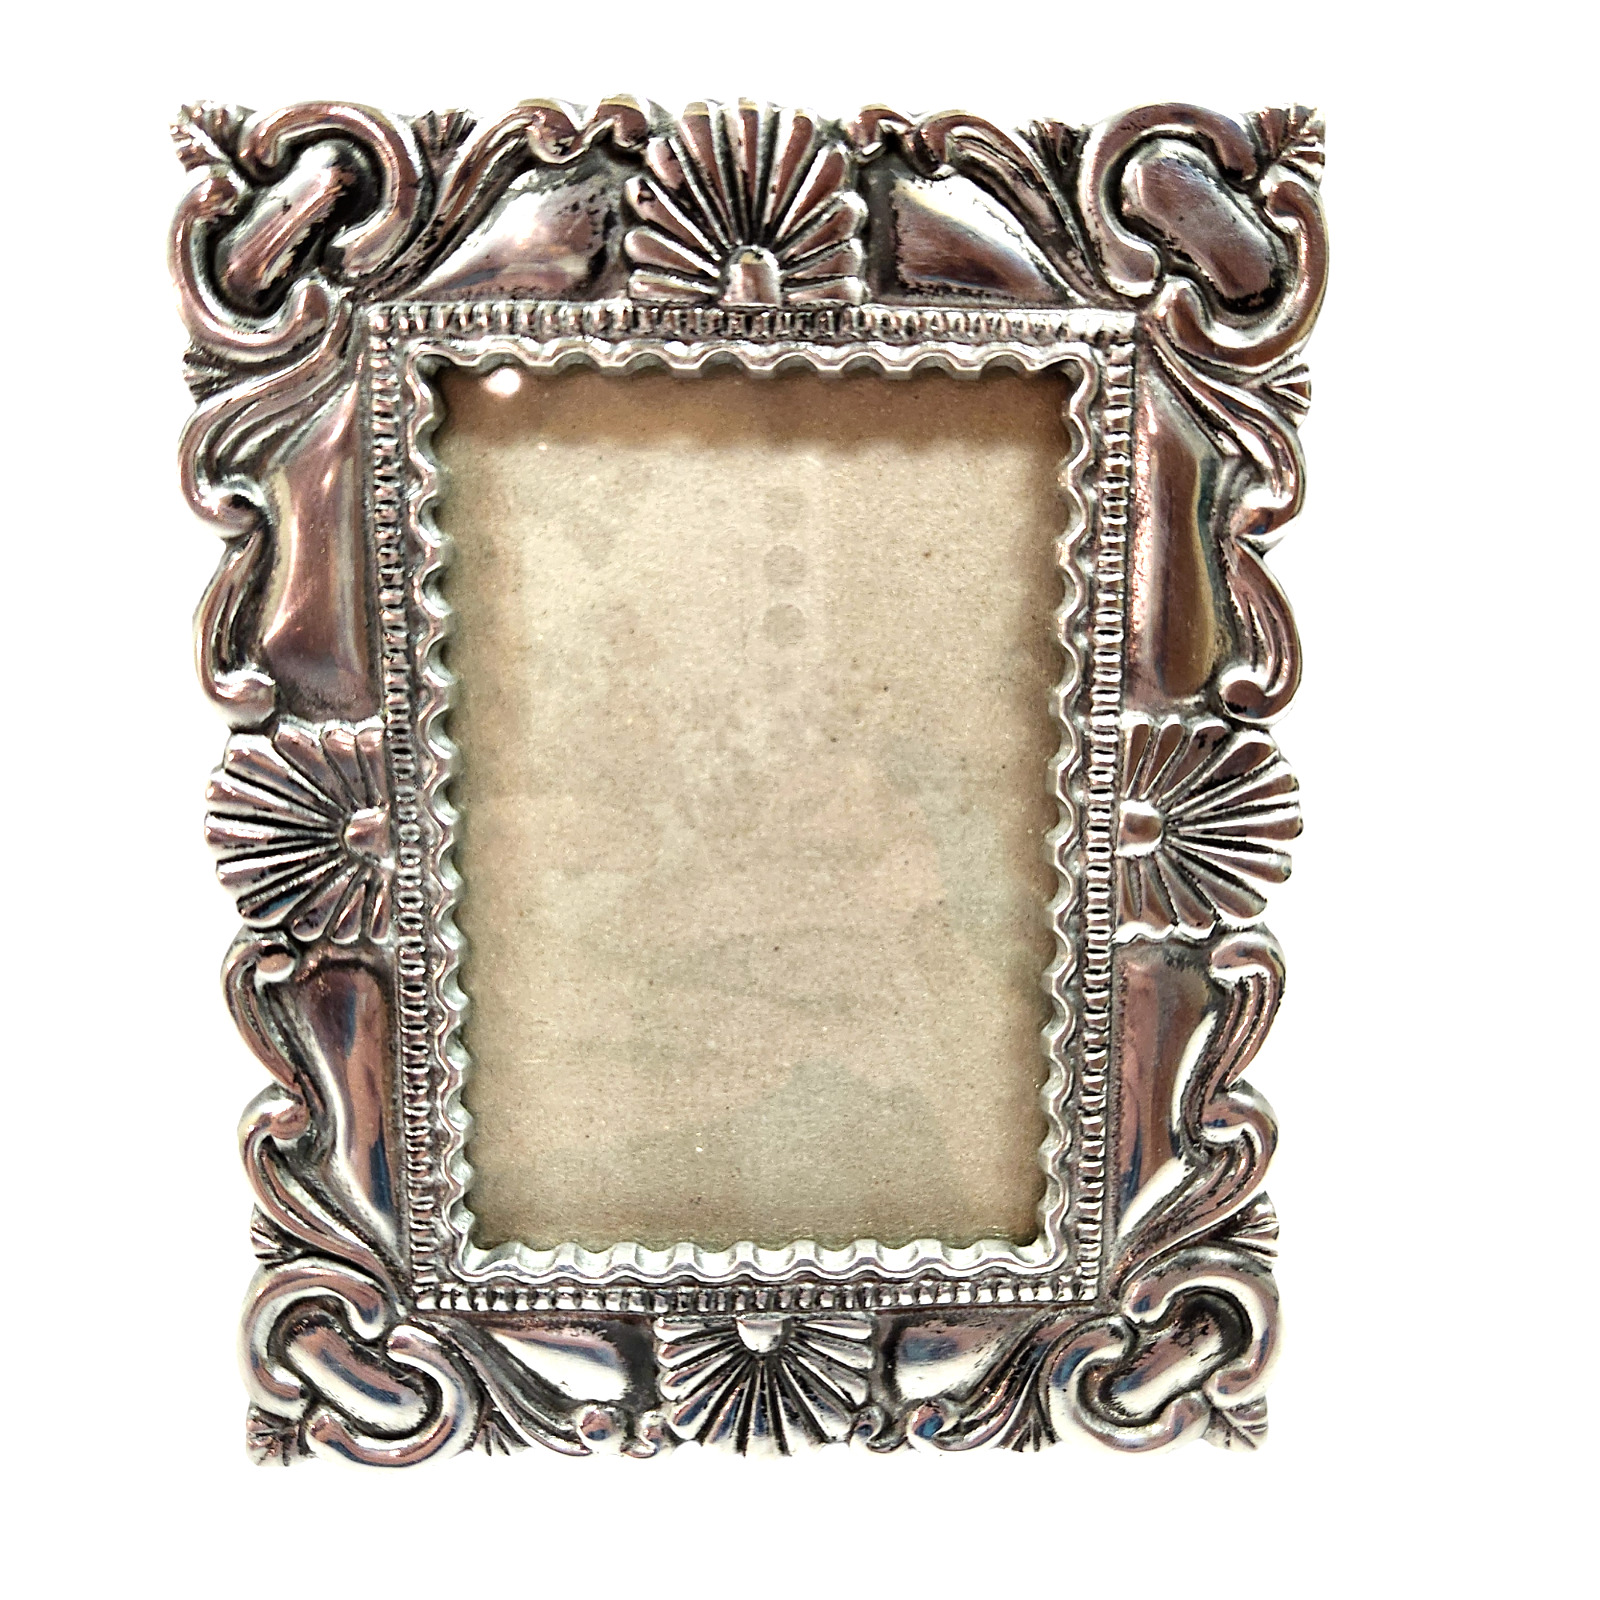 Vintage 1980s - 1990s Ornate Silver Aluminum 3.25x5 Photo Picture Frame Taiwan